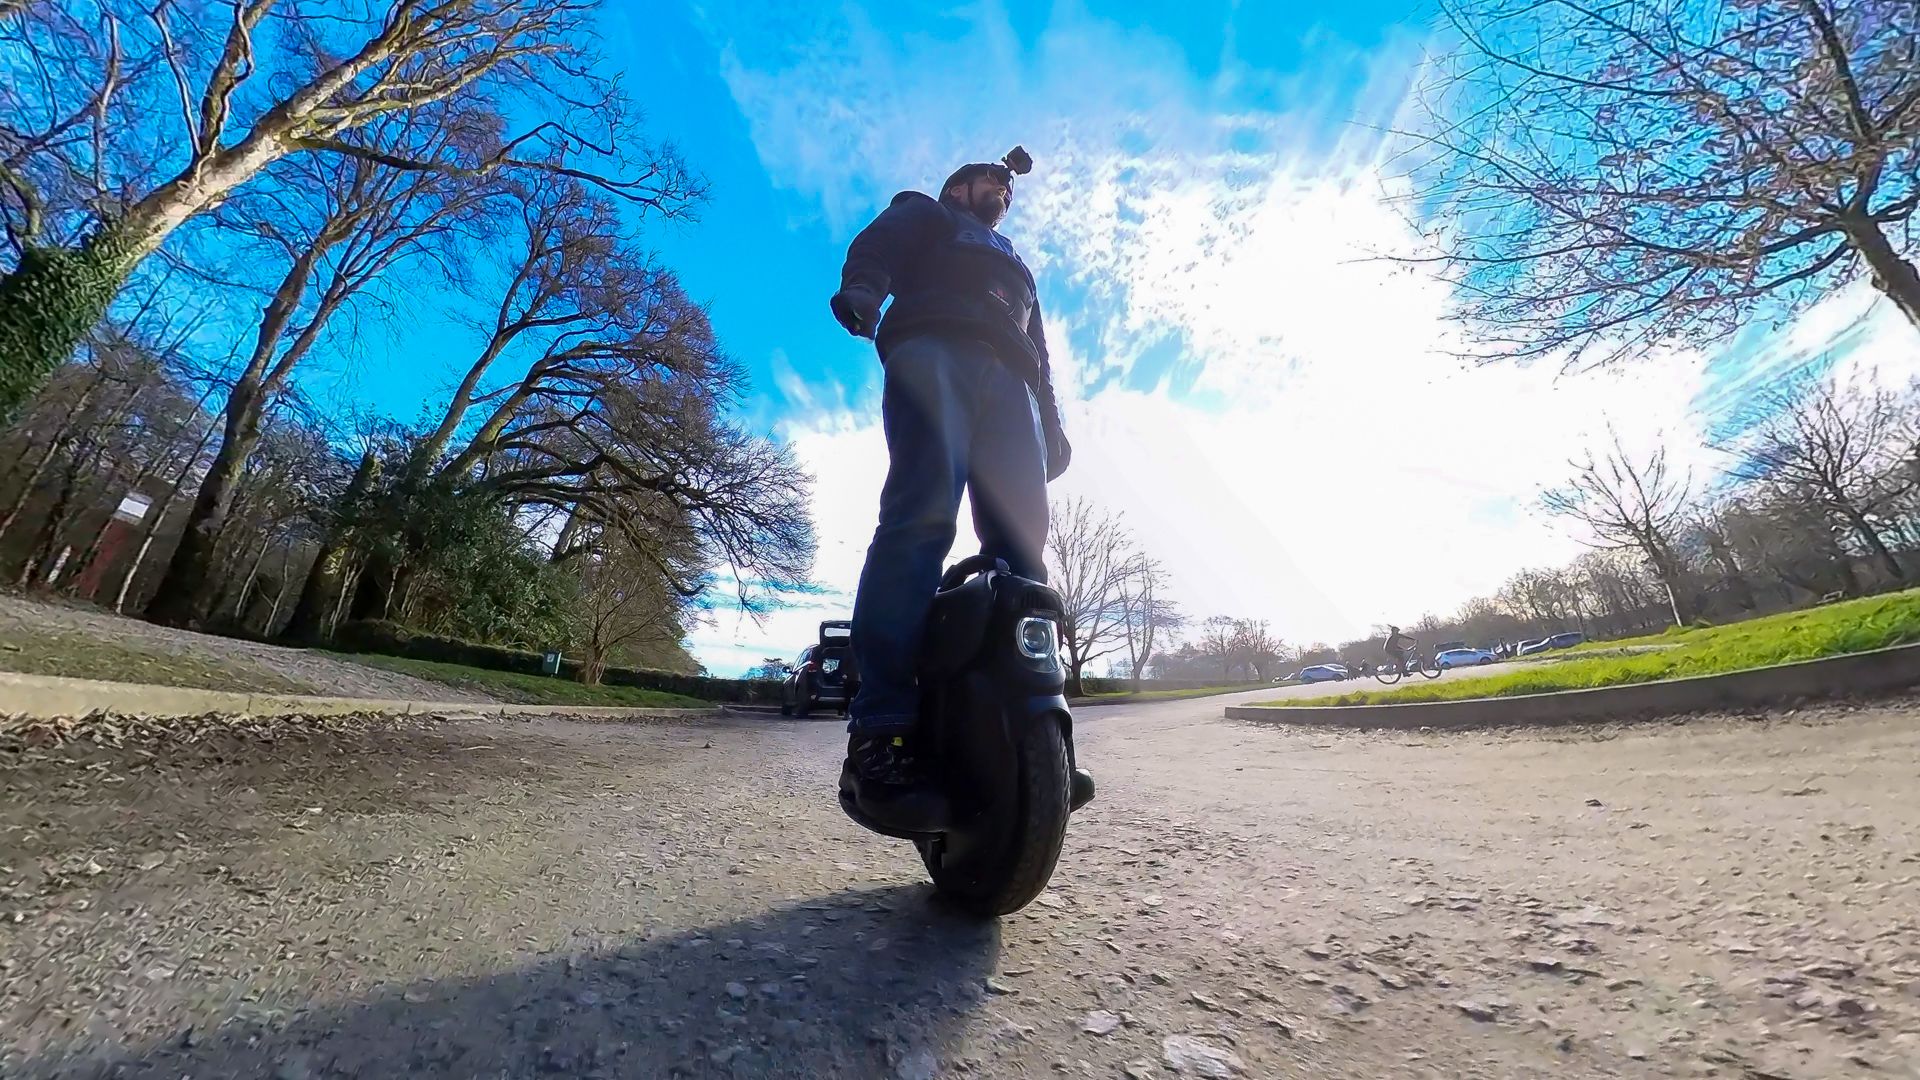 InMotion V11 Electric Unicycle: Powerful, Responsive, and Utterly Insane